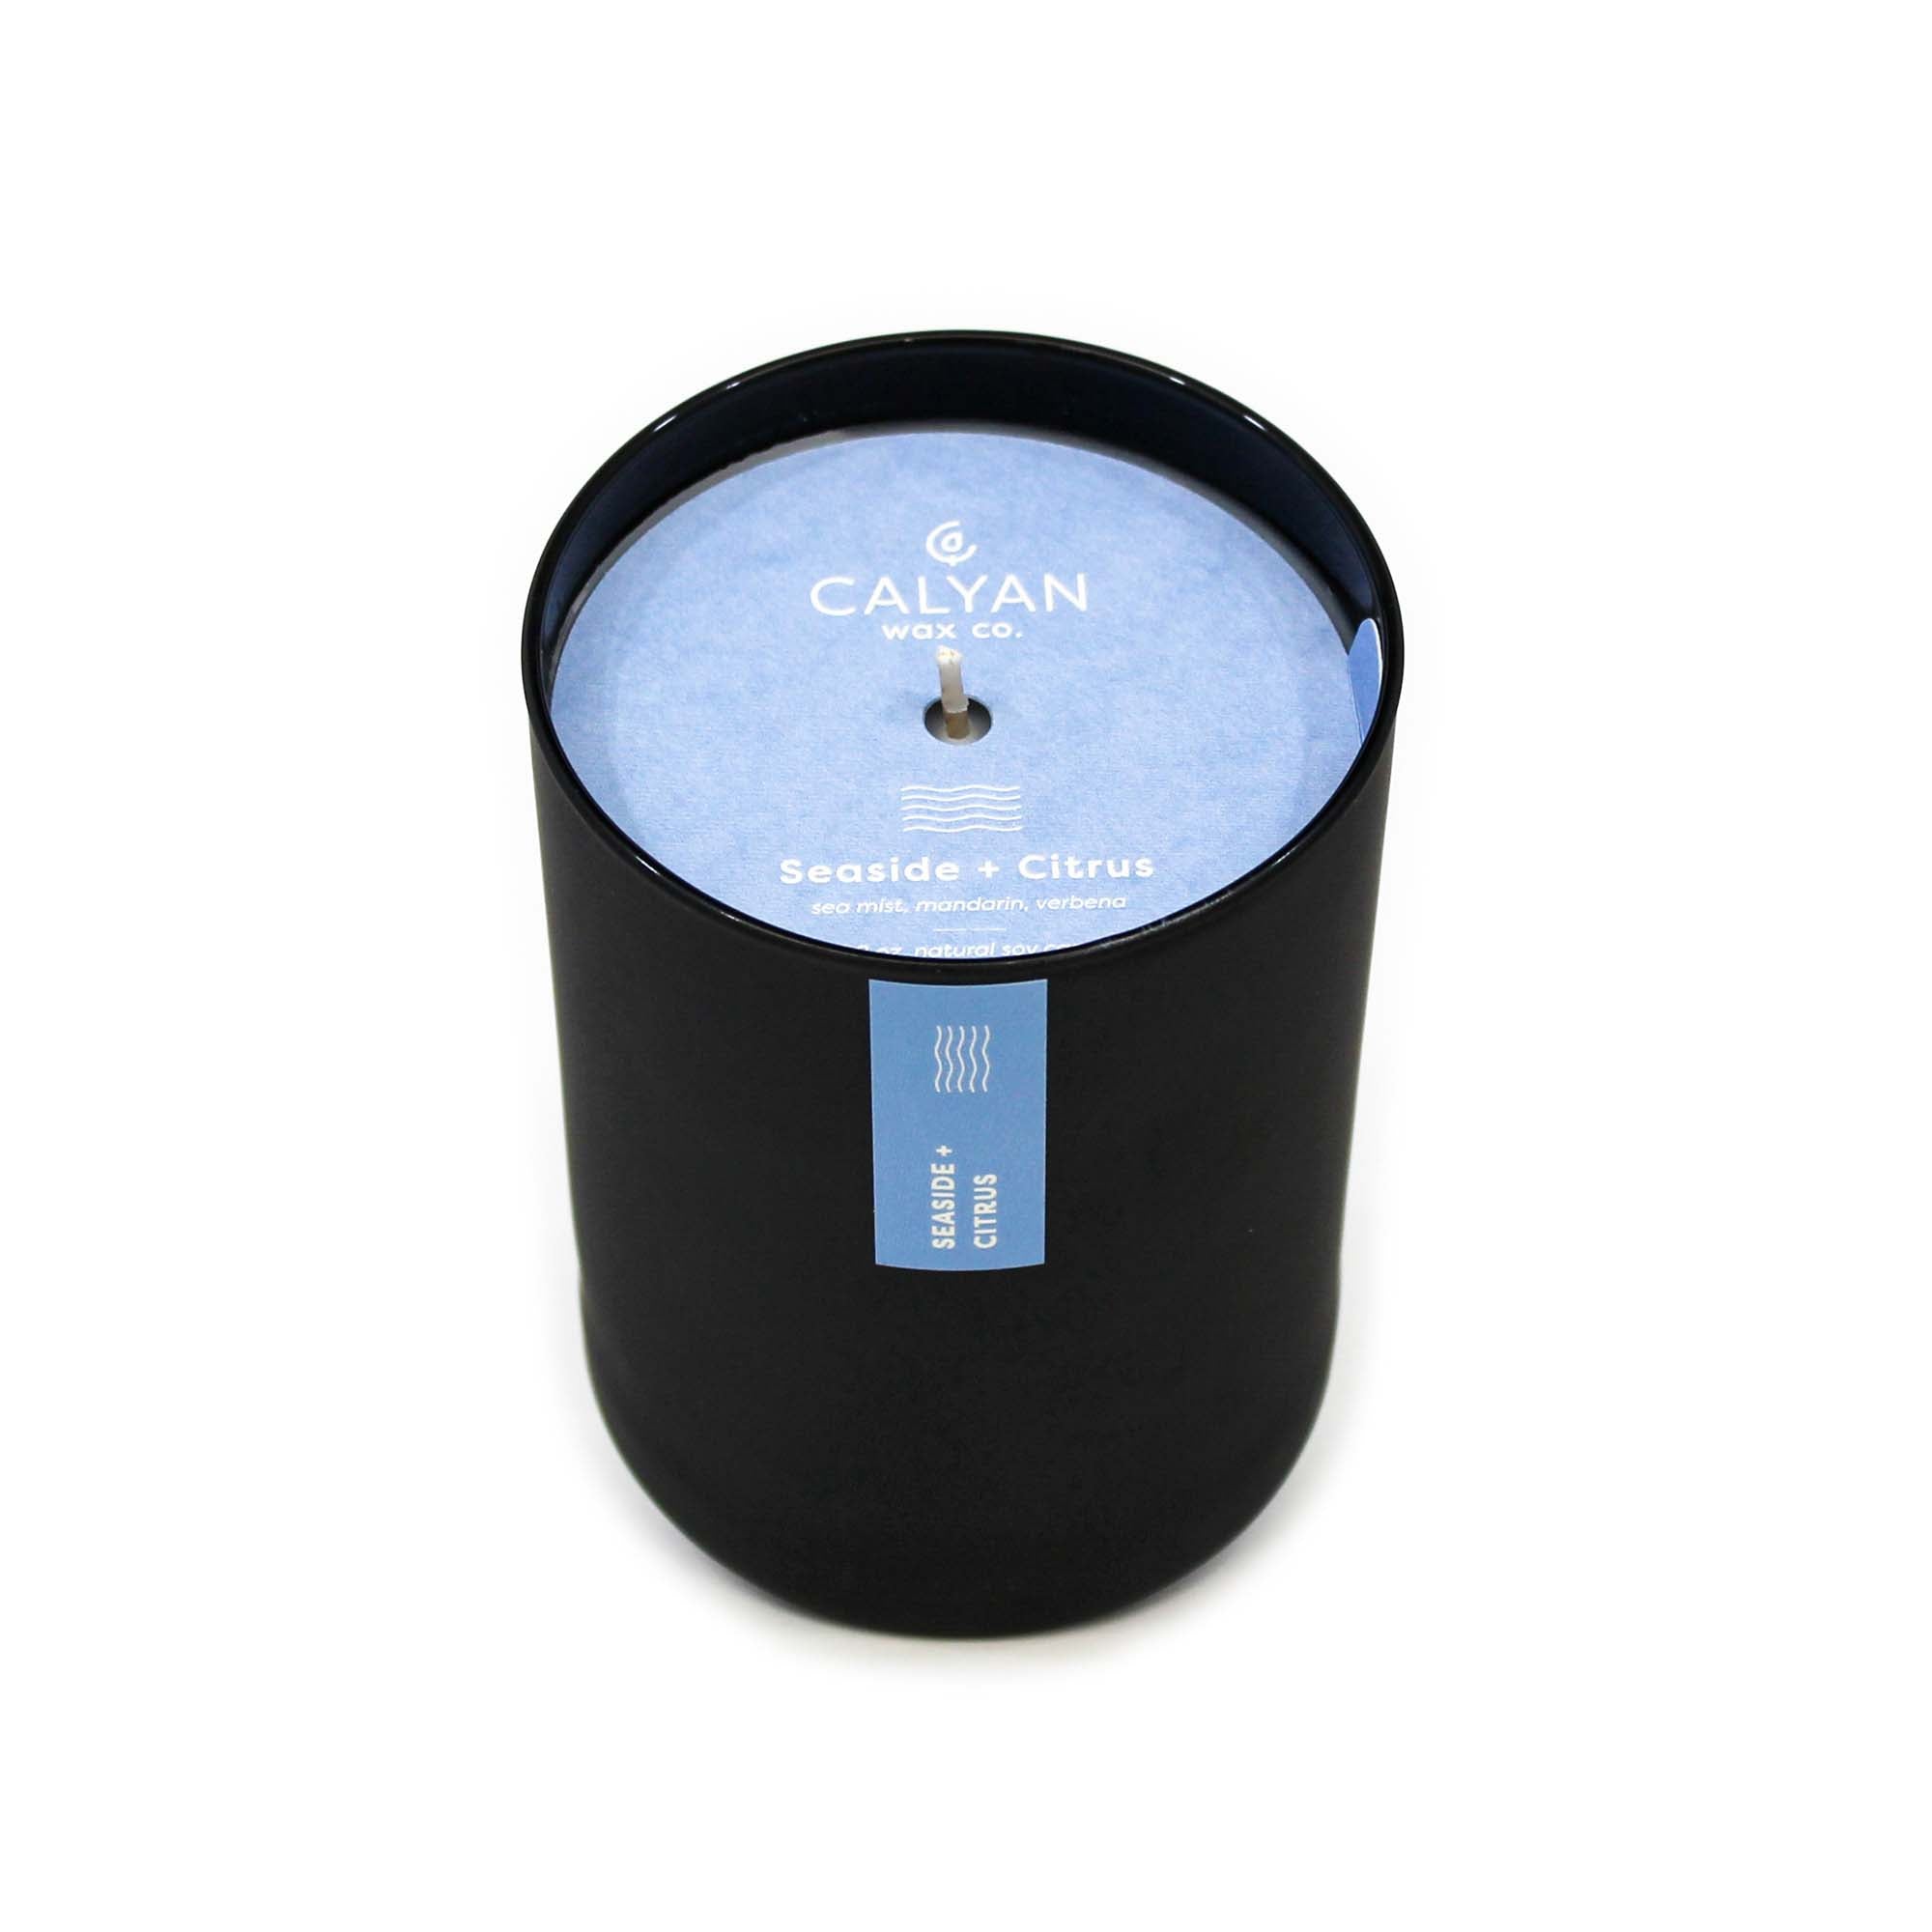 Black matte glass tumbler candle Seaside + Citrus fragrance from Calyan Wax Company